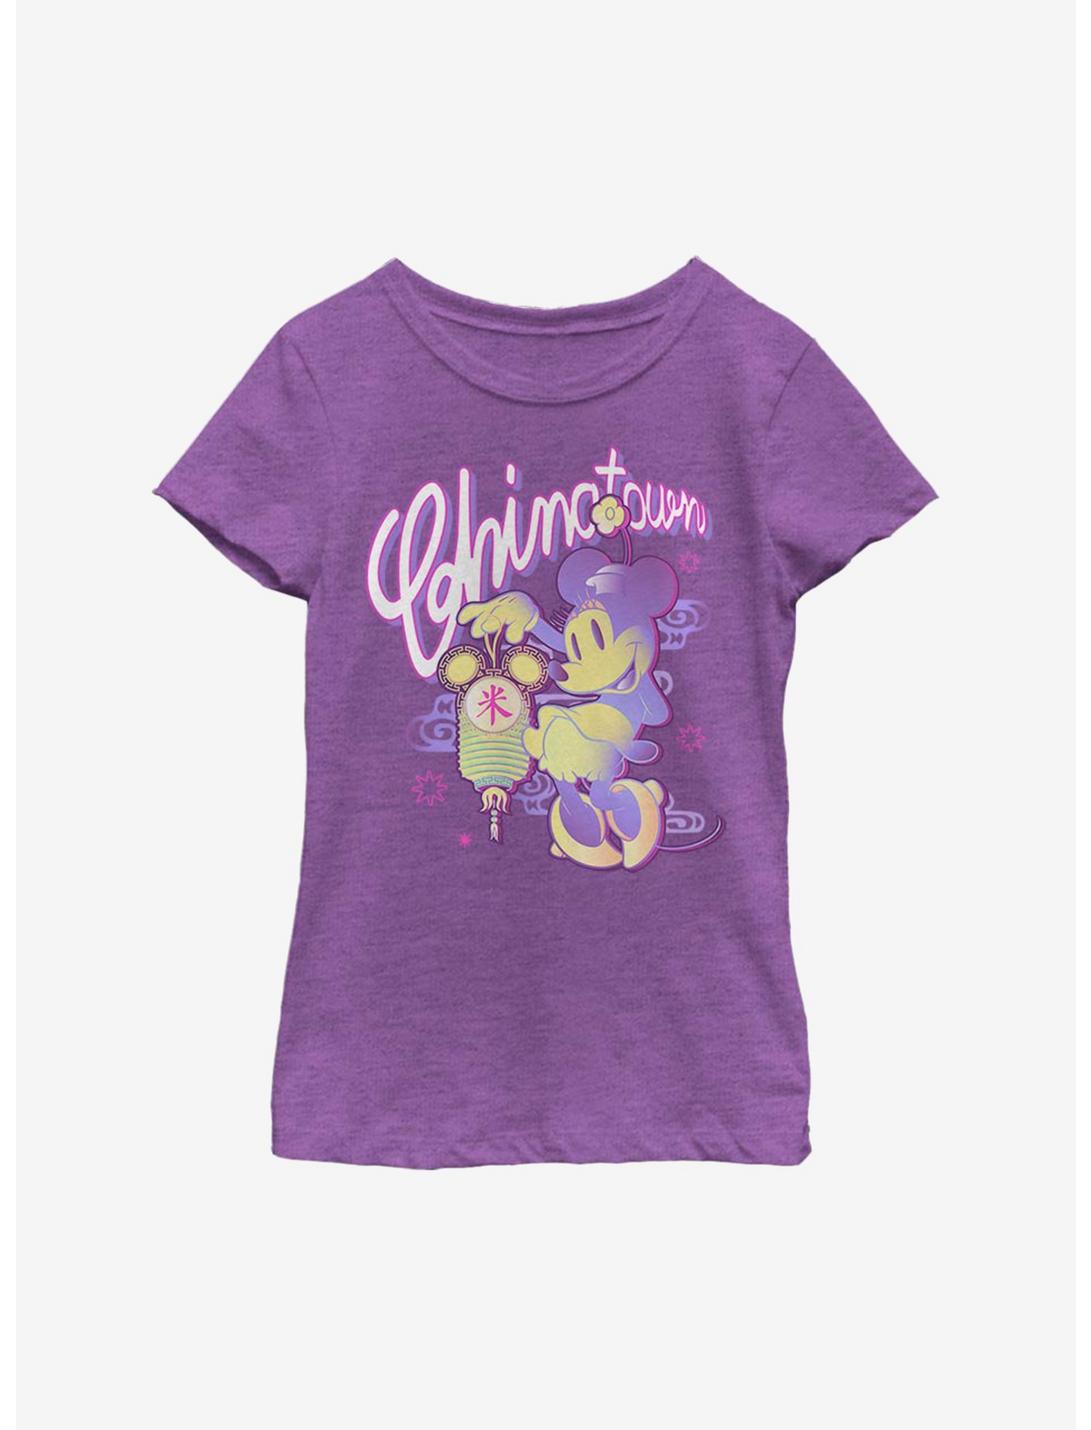 Disney Minnie Mouse Chinatown Minnie Youth Girls T-Shirt, PURPLE BERRY, hi-res